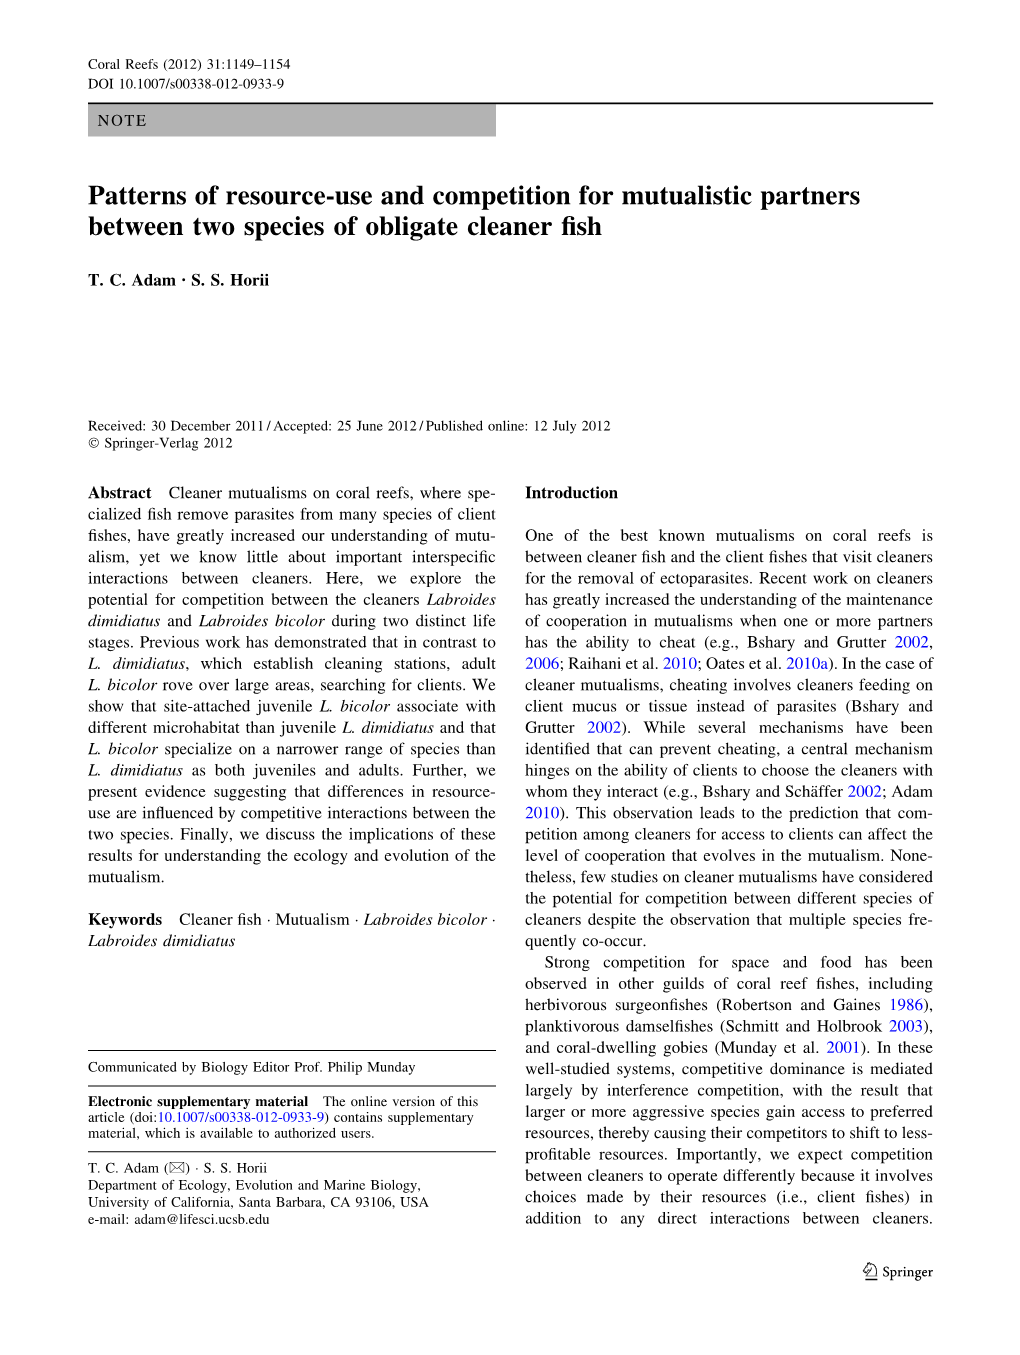 Patterns of Resource-Use and Competition for Mutualistic Partners Between Two Species of Obligate Cleaner ﬁsh